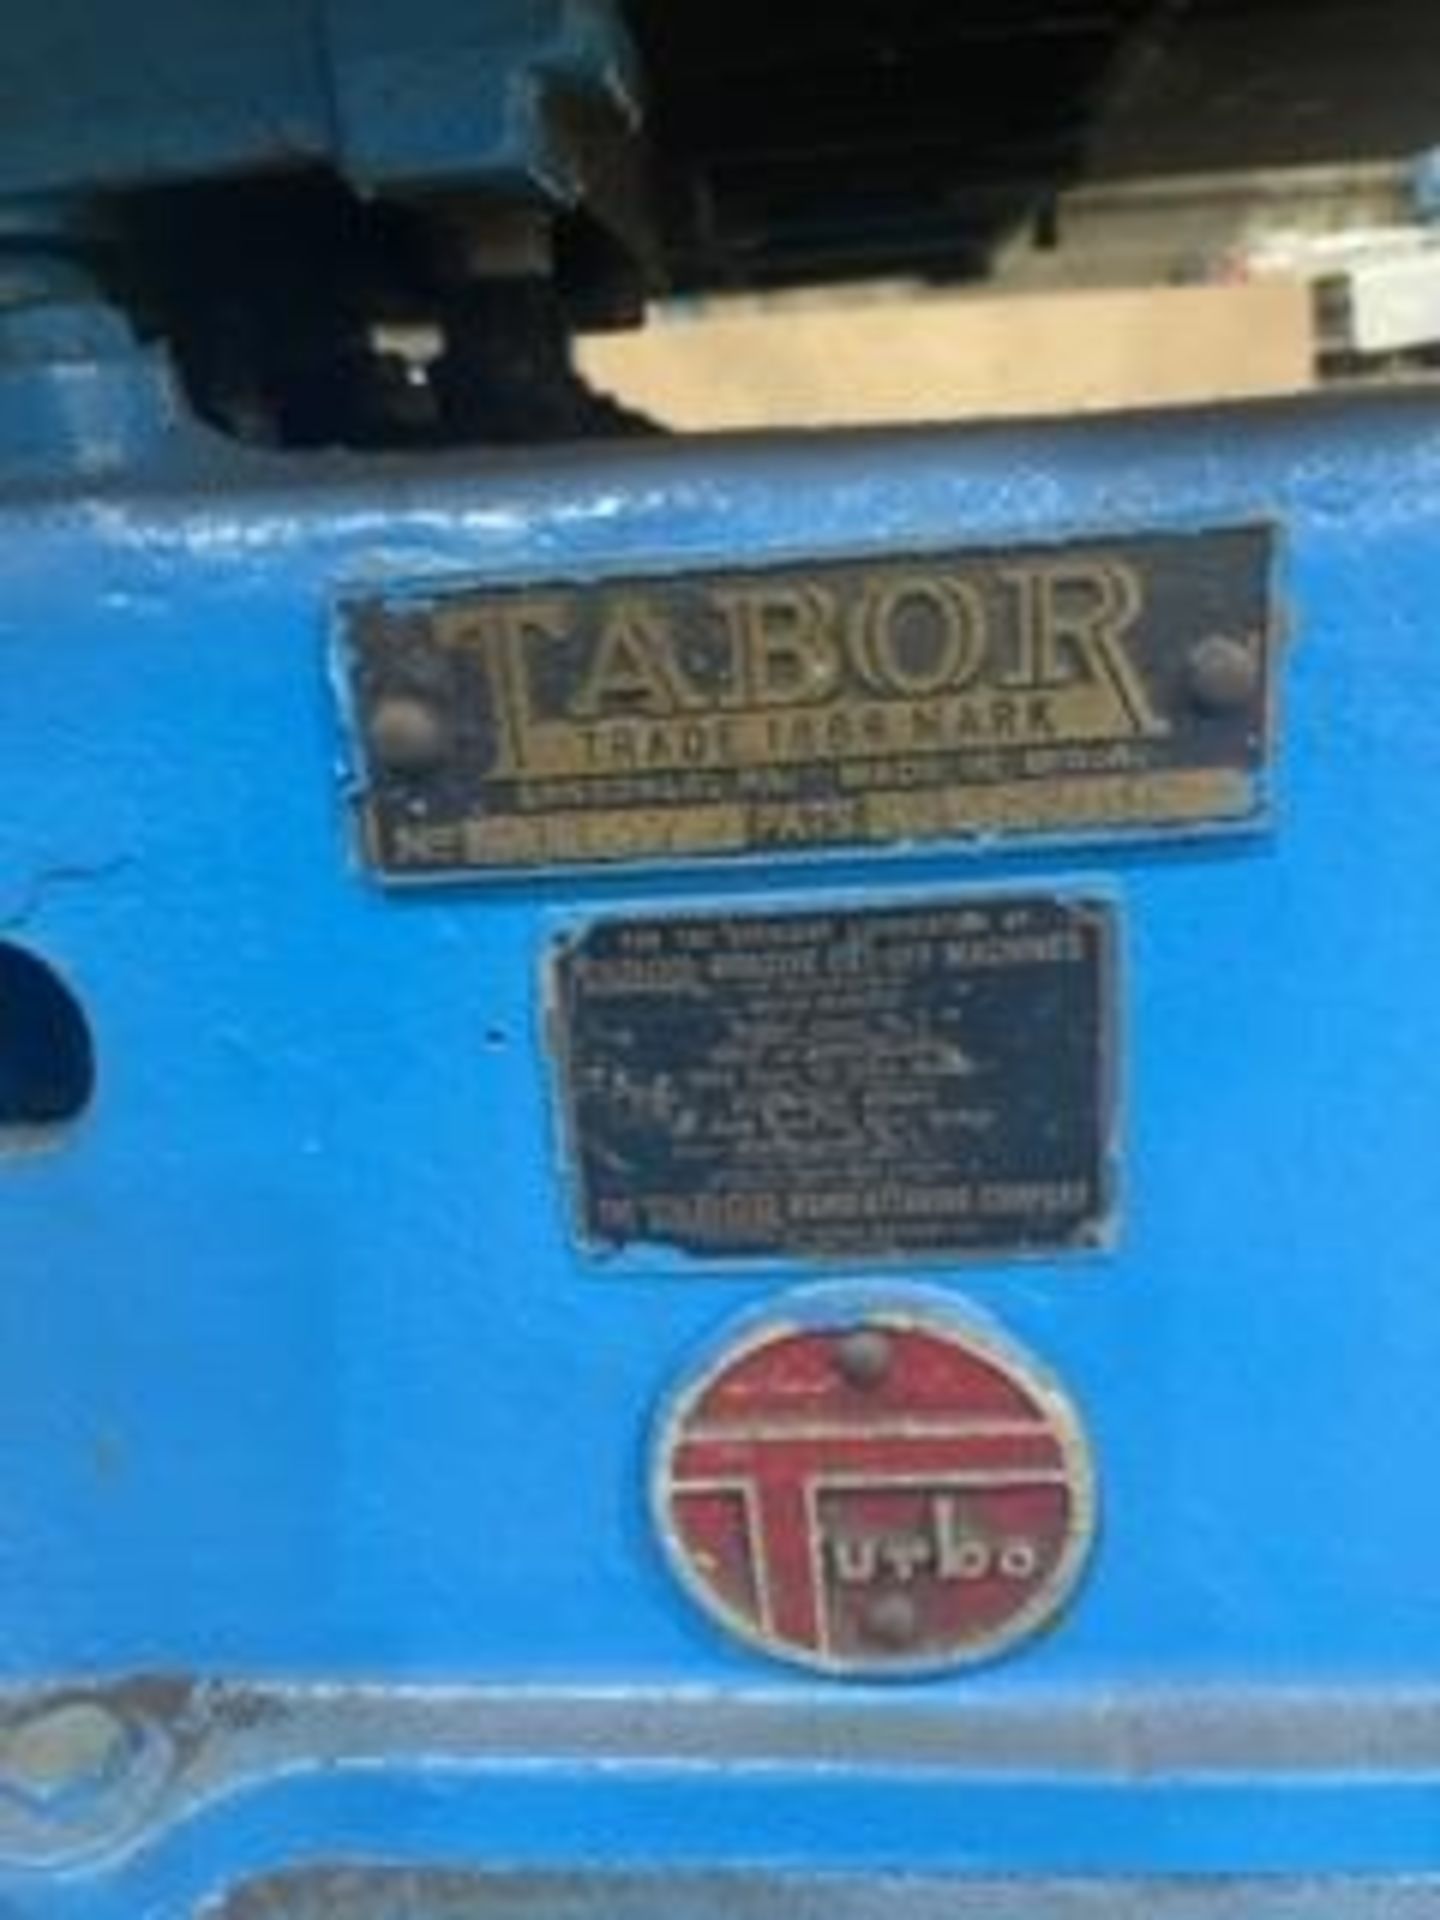 Tabor Abrasive Cut-Off Saw - Image 3 of 4